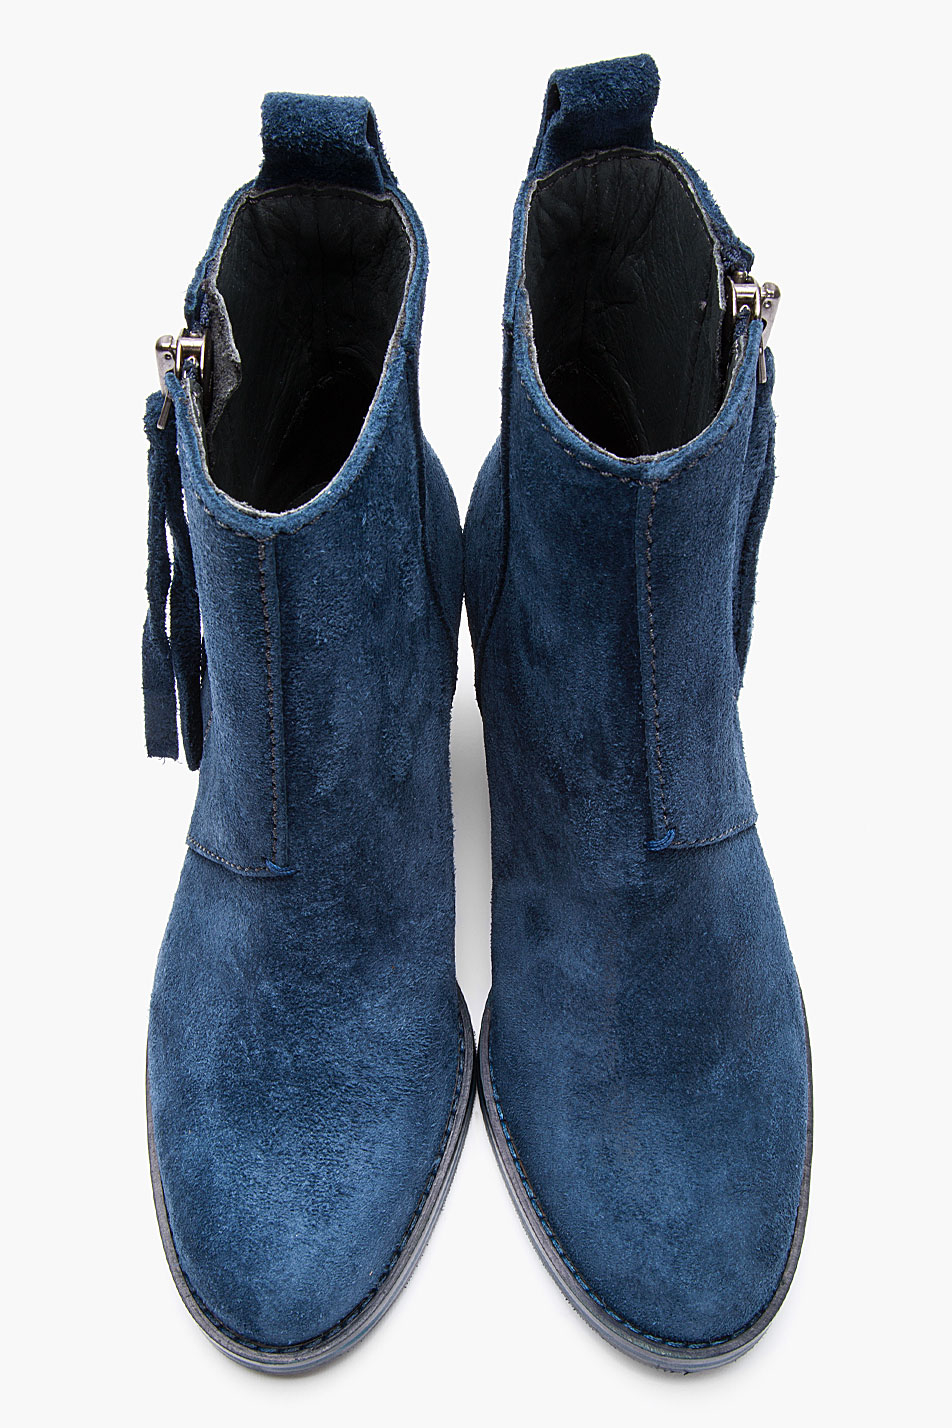 Acne studios Blue Brushed Suede Pistol Ankle Boots in Blue | Lyst